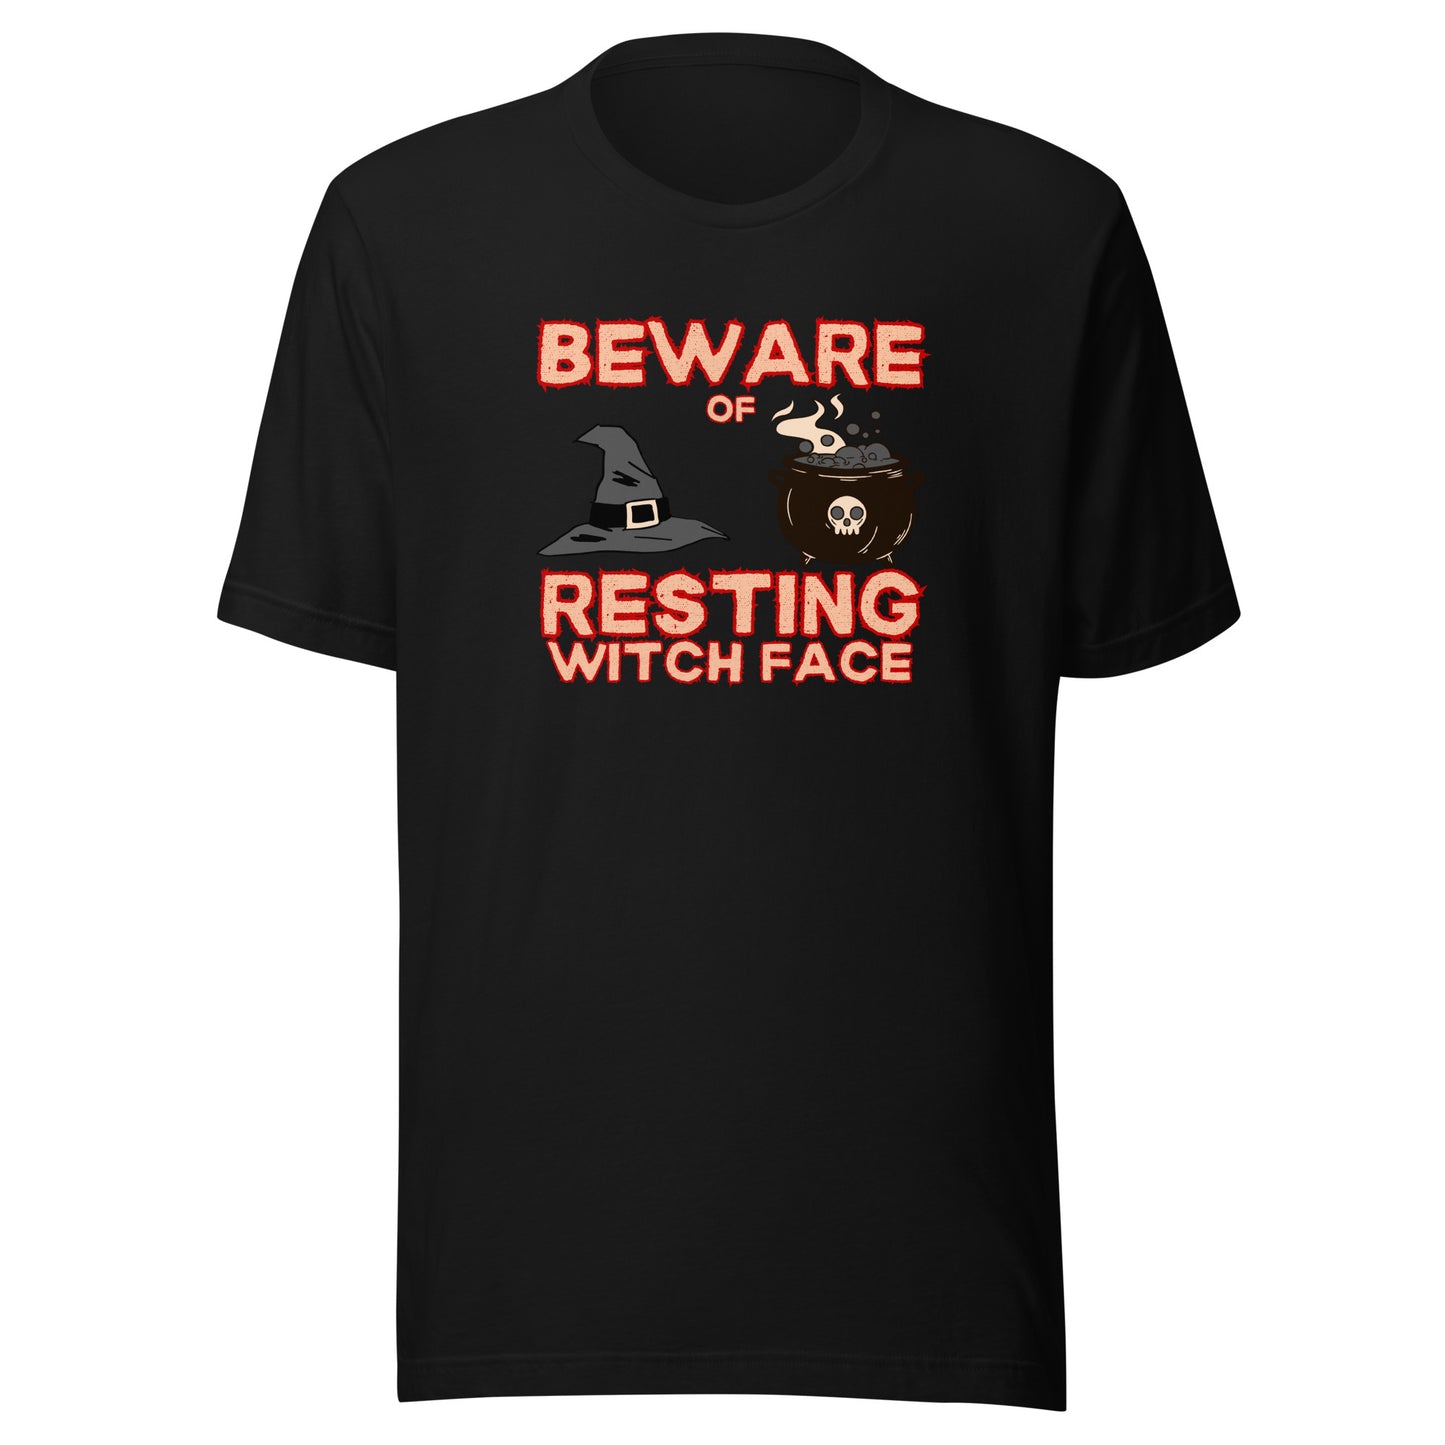 Beware of Resting Witch Face